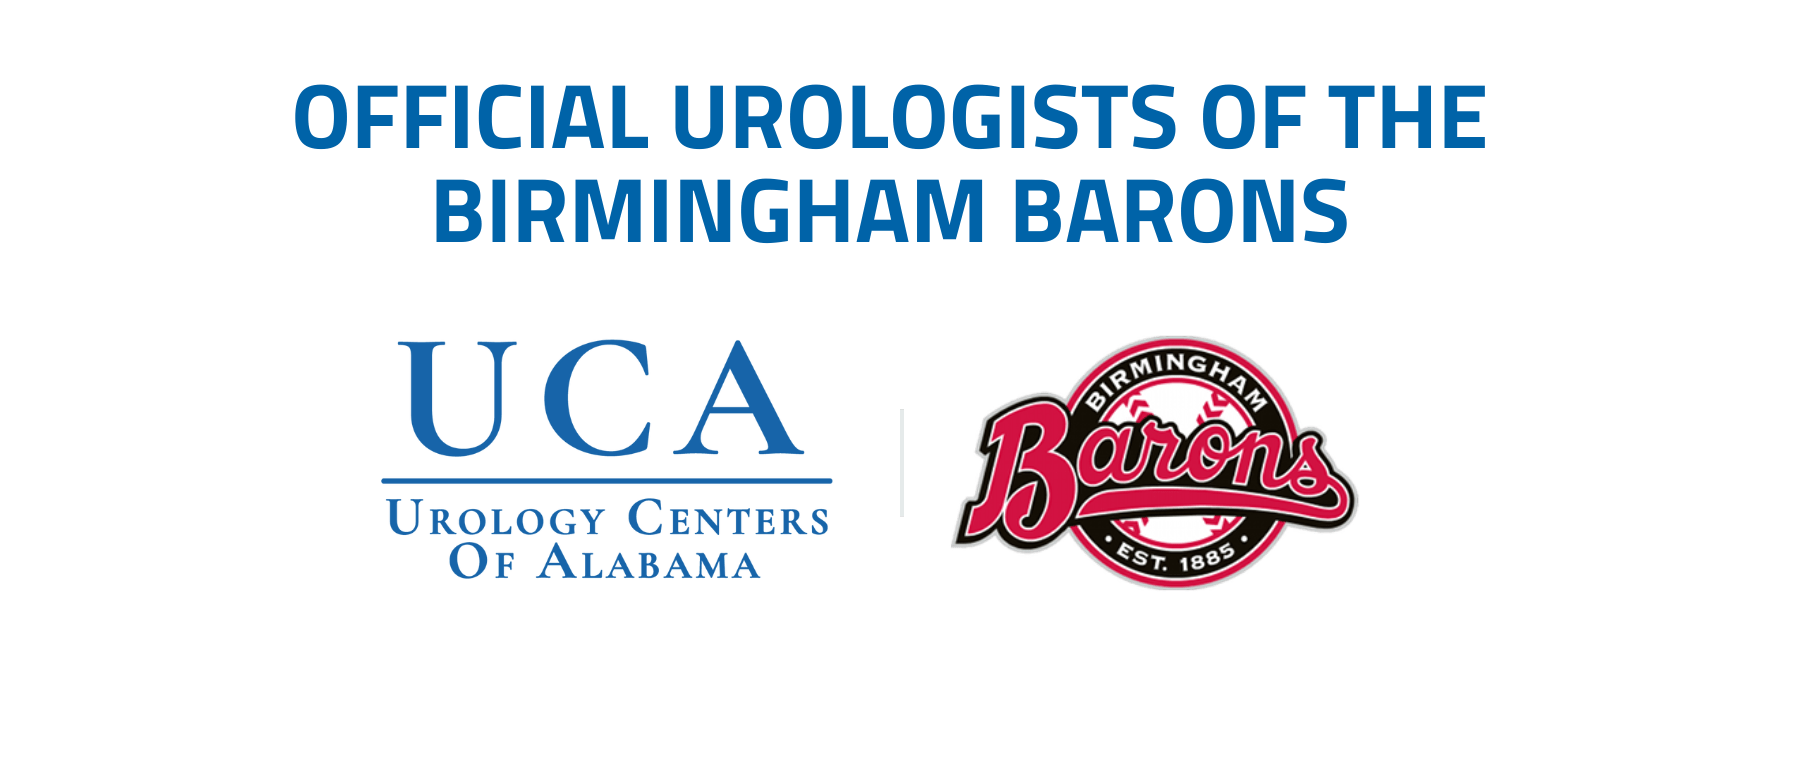 Official Urologists of the Birmingham Barons